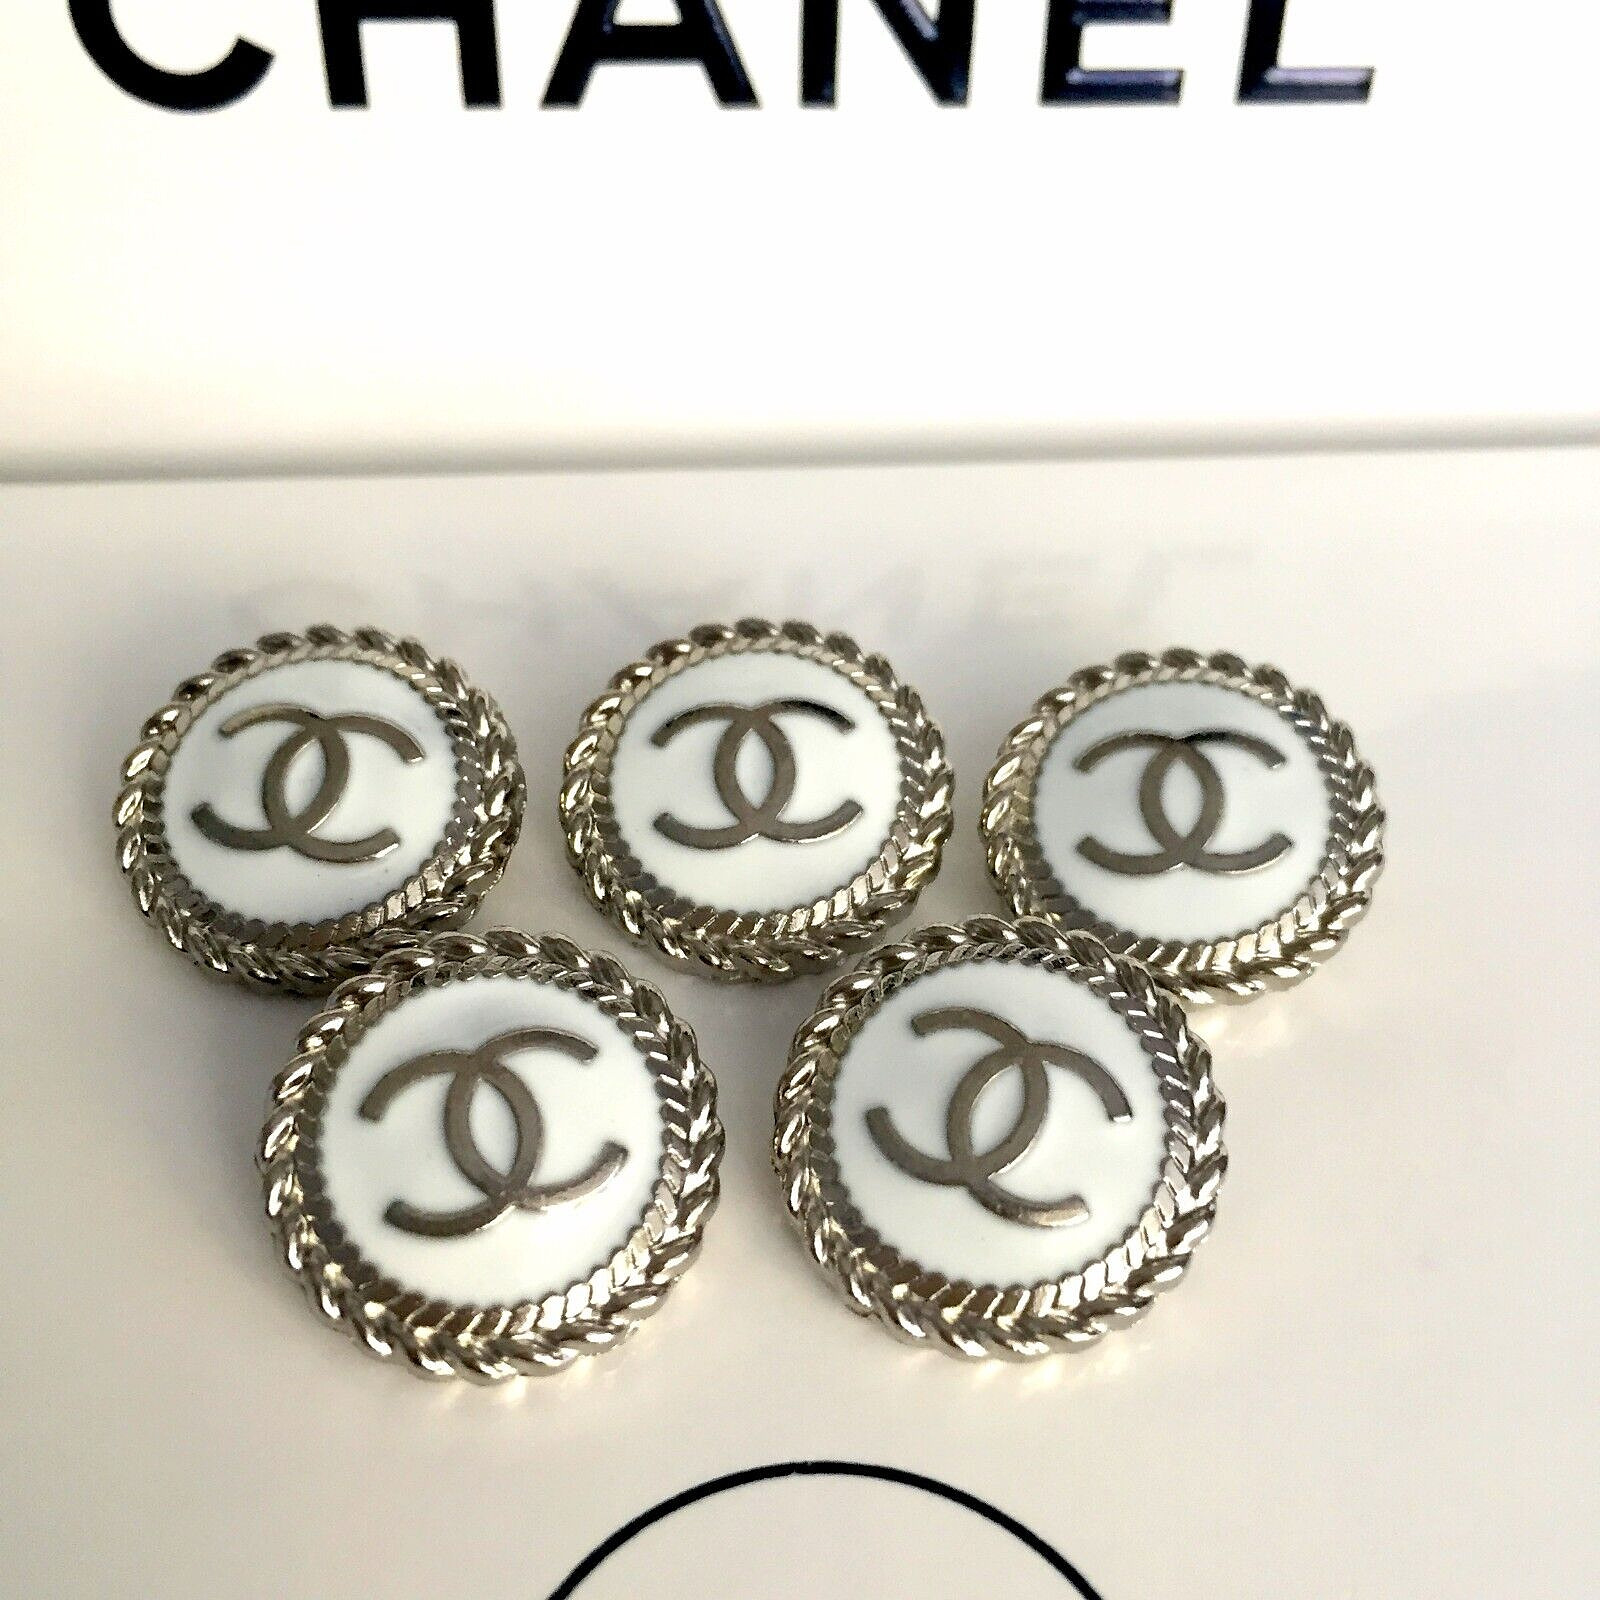 SET 7 Vintage 22 mm Chanel CC Stamped  Logo Silver tone Buttons 0,87 inch